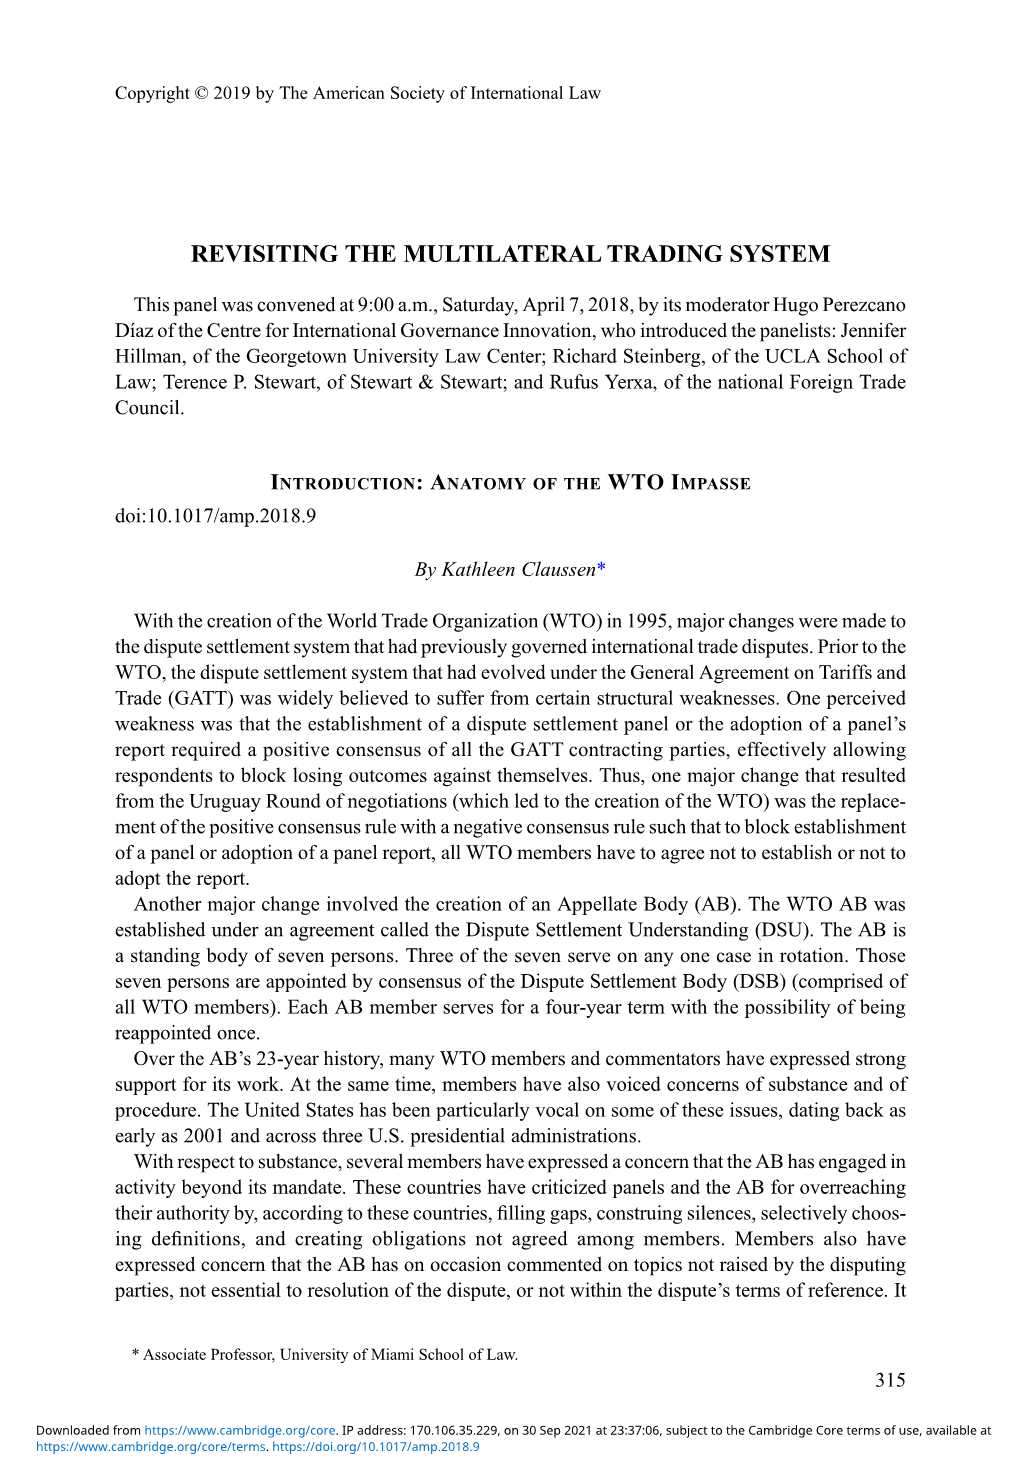 Revisiting the Multilateral Trading System